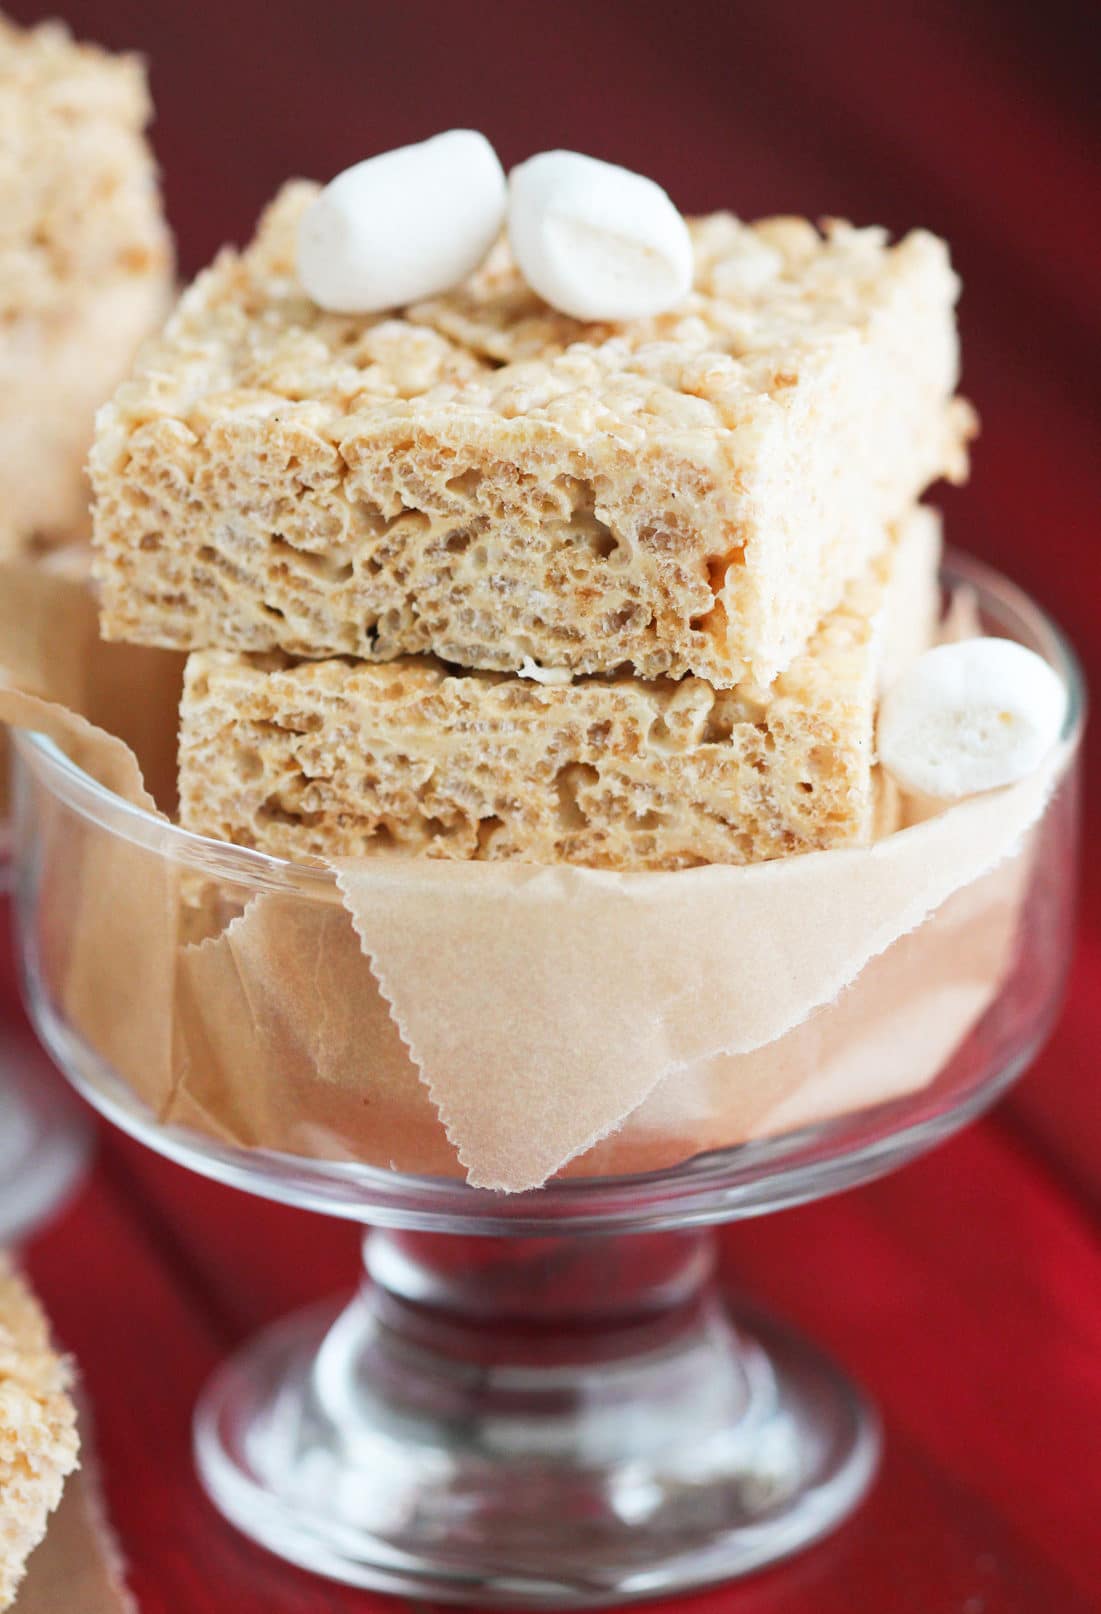 Simple, quick, and easy Healthy Protein Krispy Treats recipe – only 4 ingredients needed to make these chewy and crunchy (all natural, low fat, refined sugar free, and gluten free) treats! Healthy Dessert Recipes at Desserts with Benefits